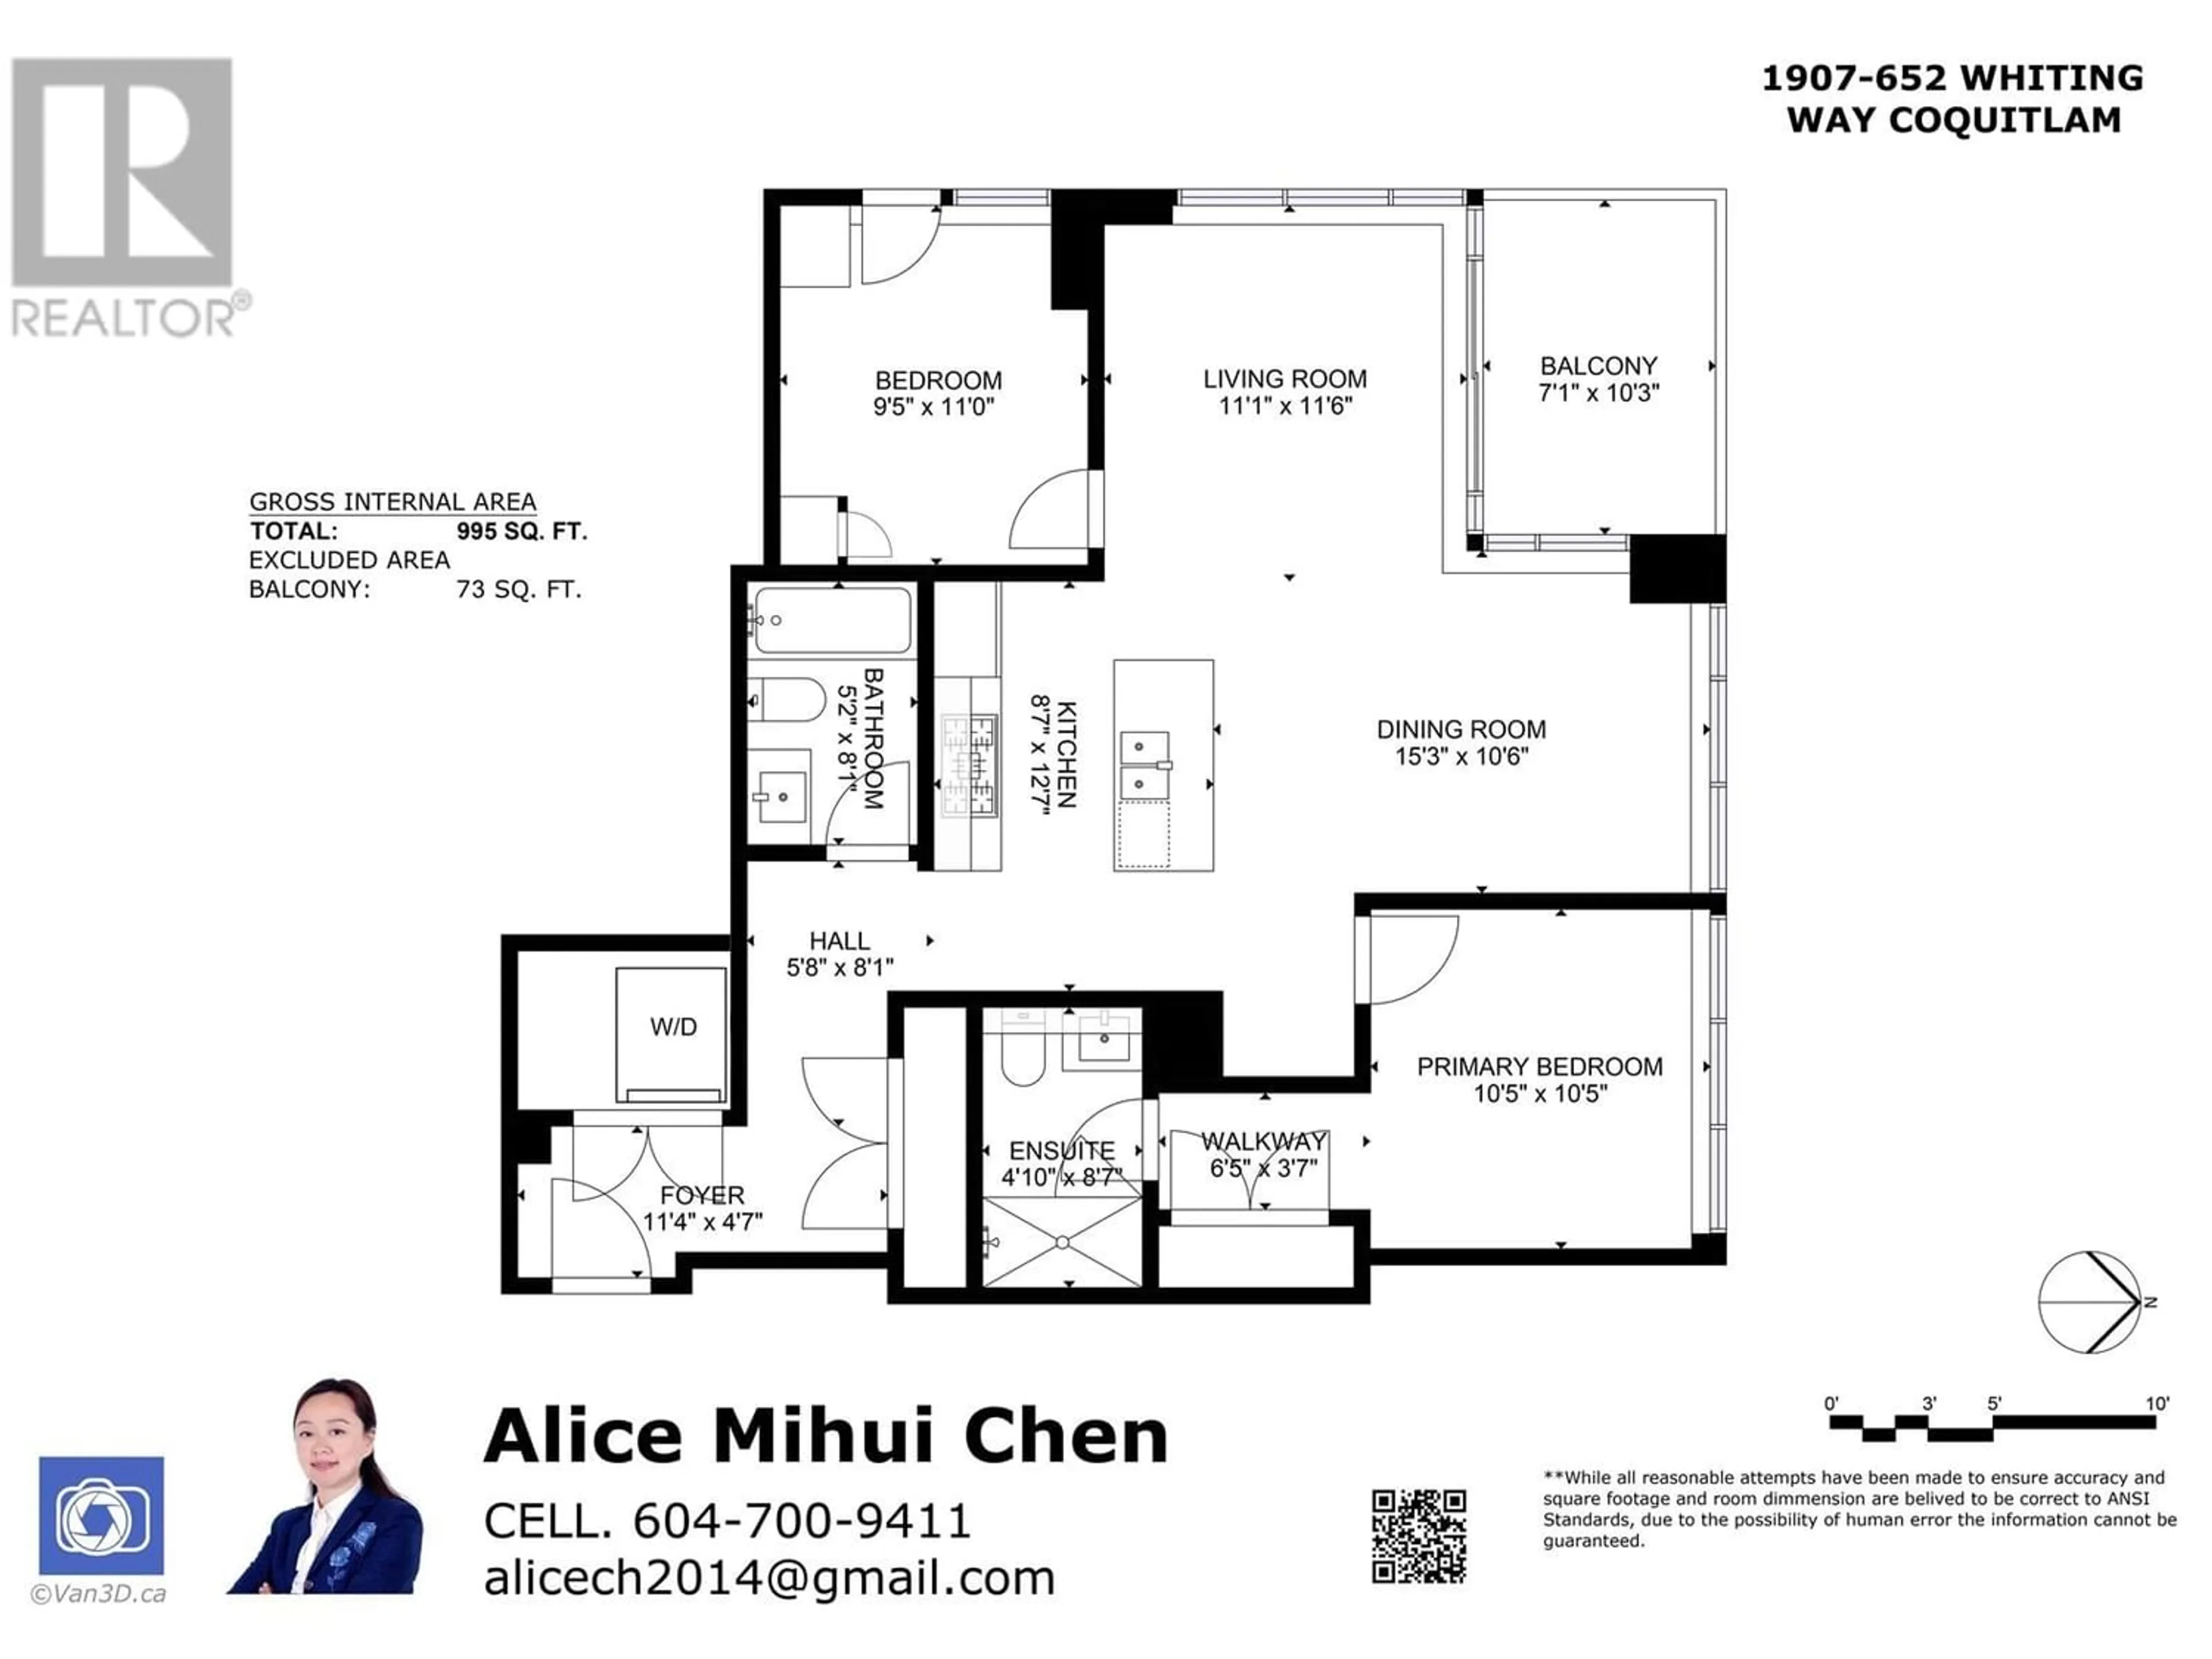 Floor plan for 1907 652 WHITING WAY, Coquitlam British Columbia V3J0K3